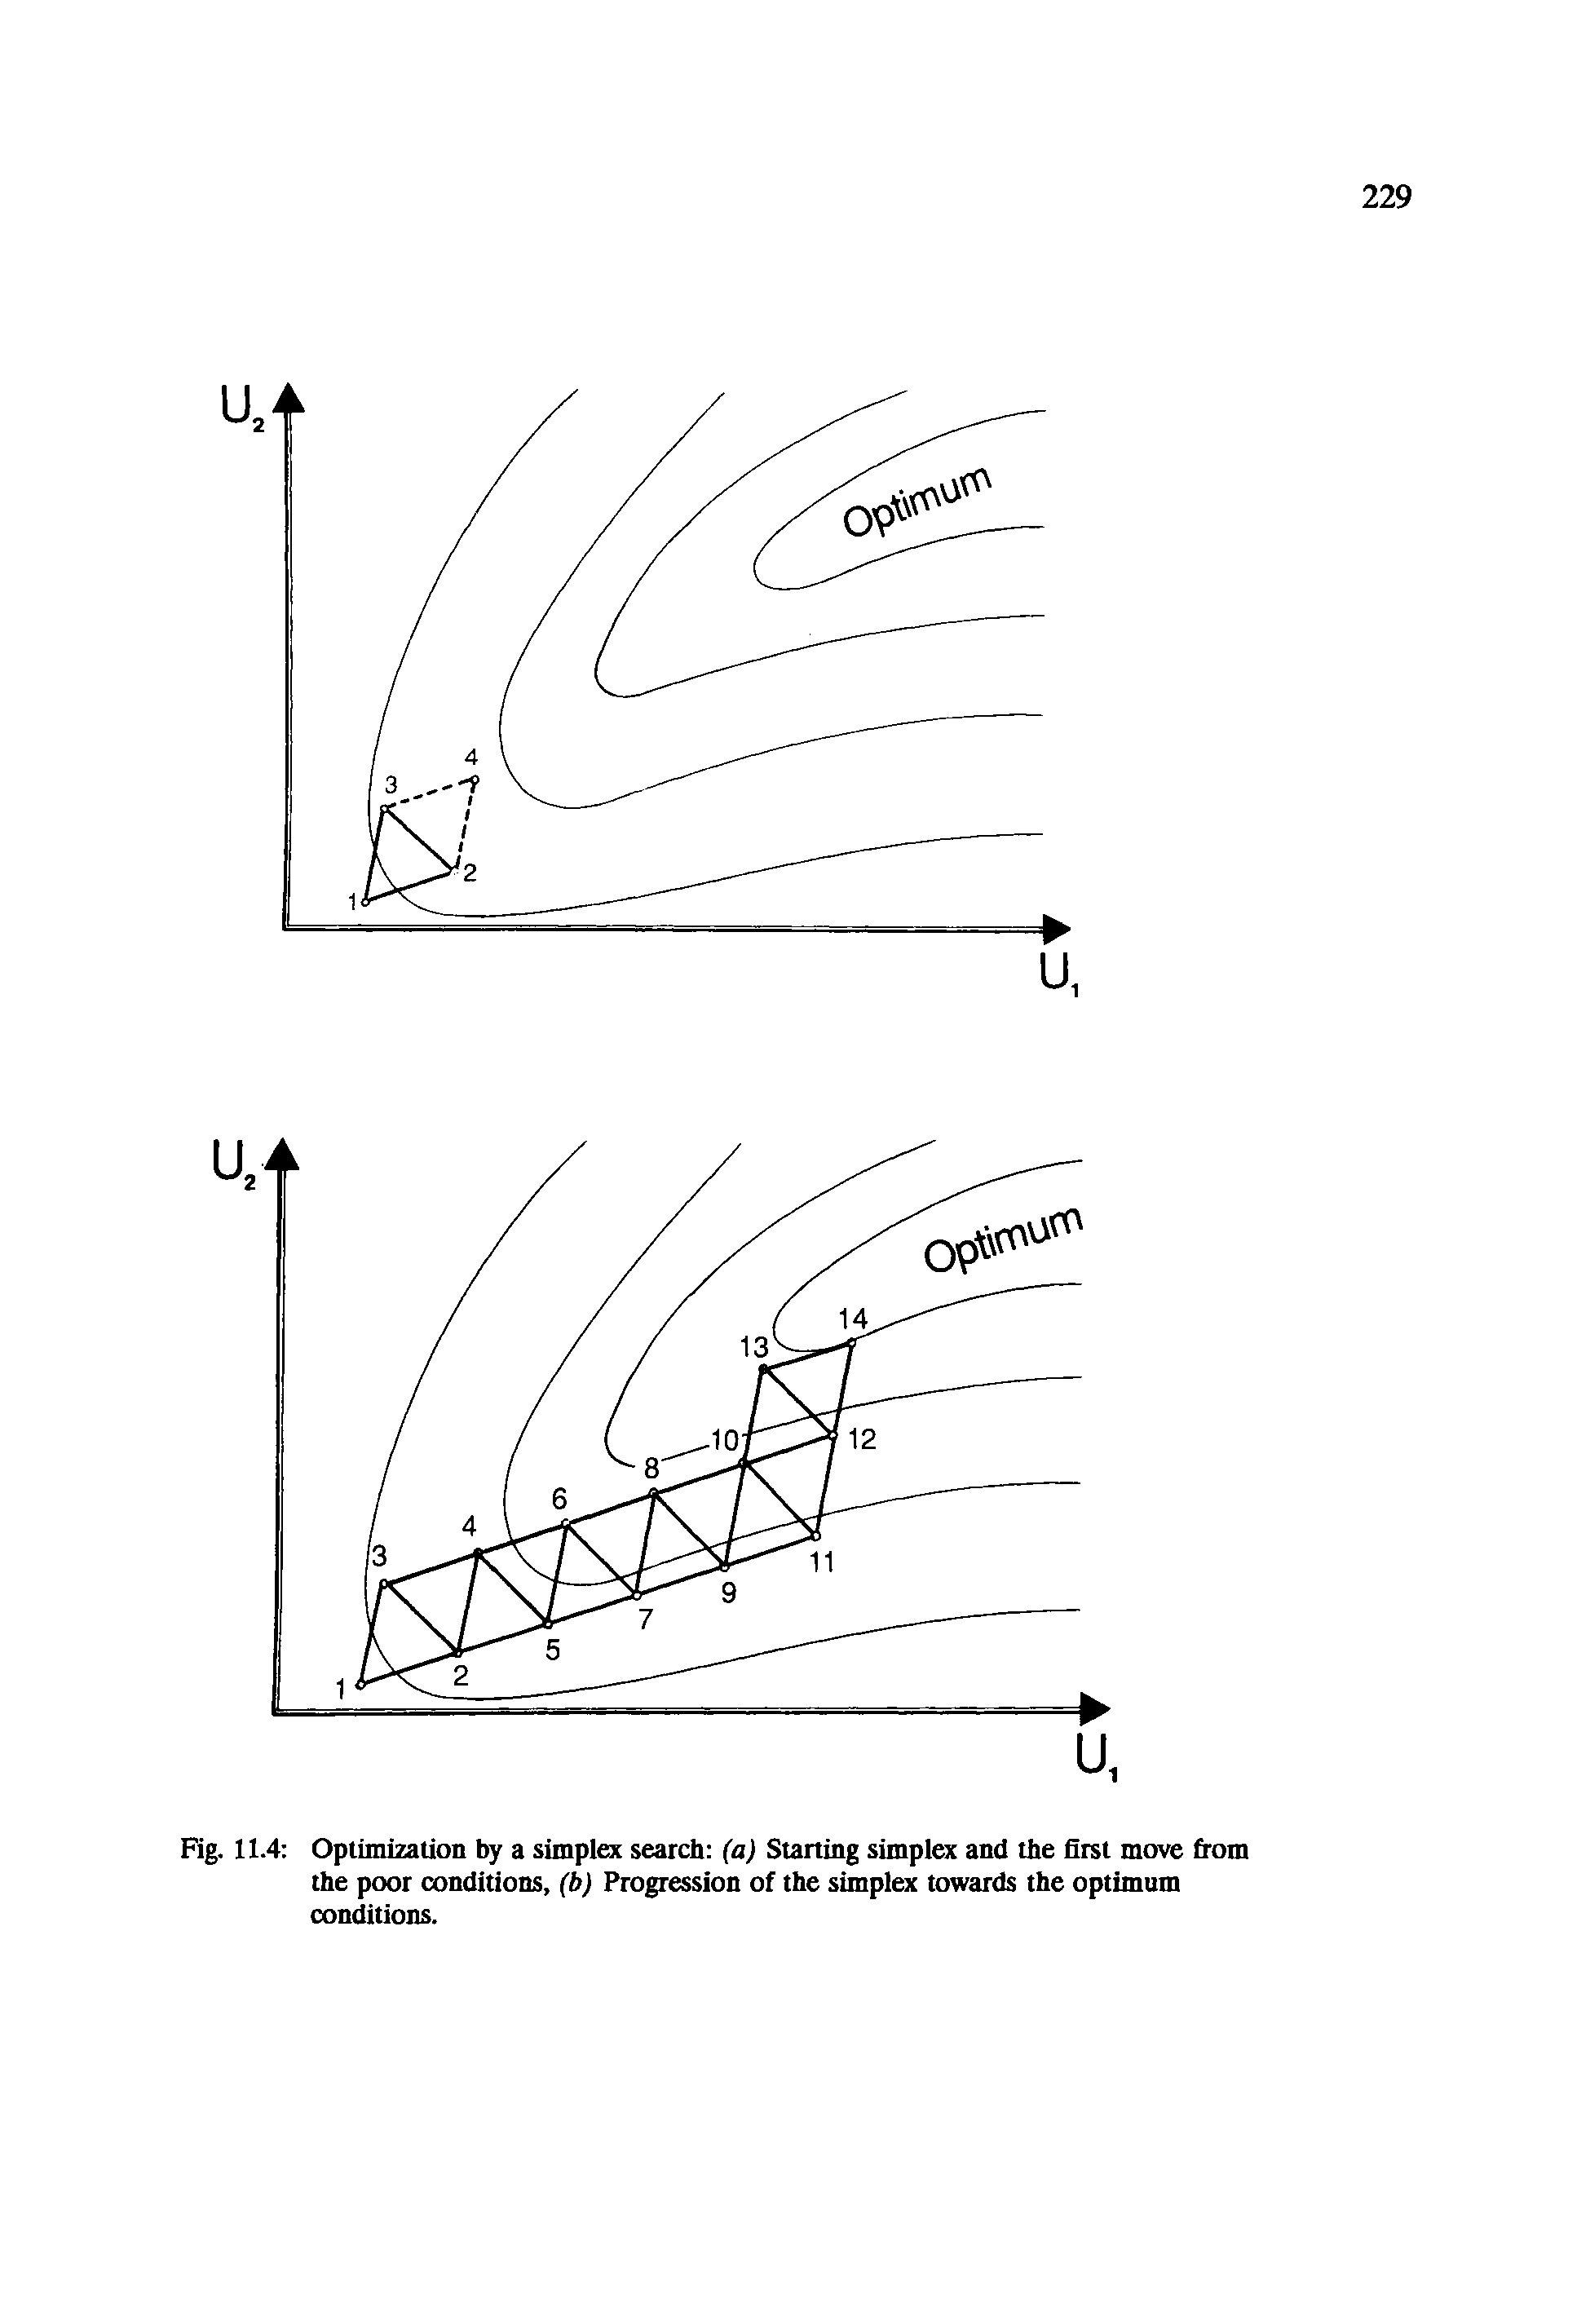 Fig. 11.4 Optimization by a simplex search (a) Starting simplex and the first move from the poor conditions, (b) Progression of the simplex towards the optimum conditions.